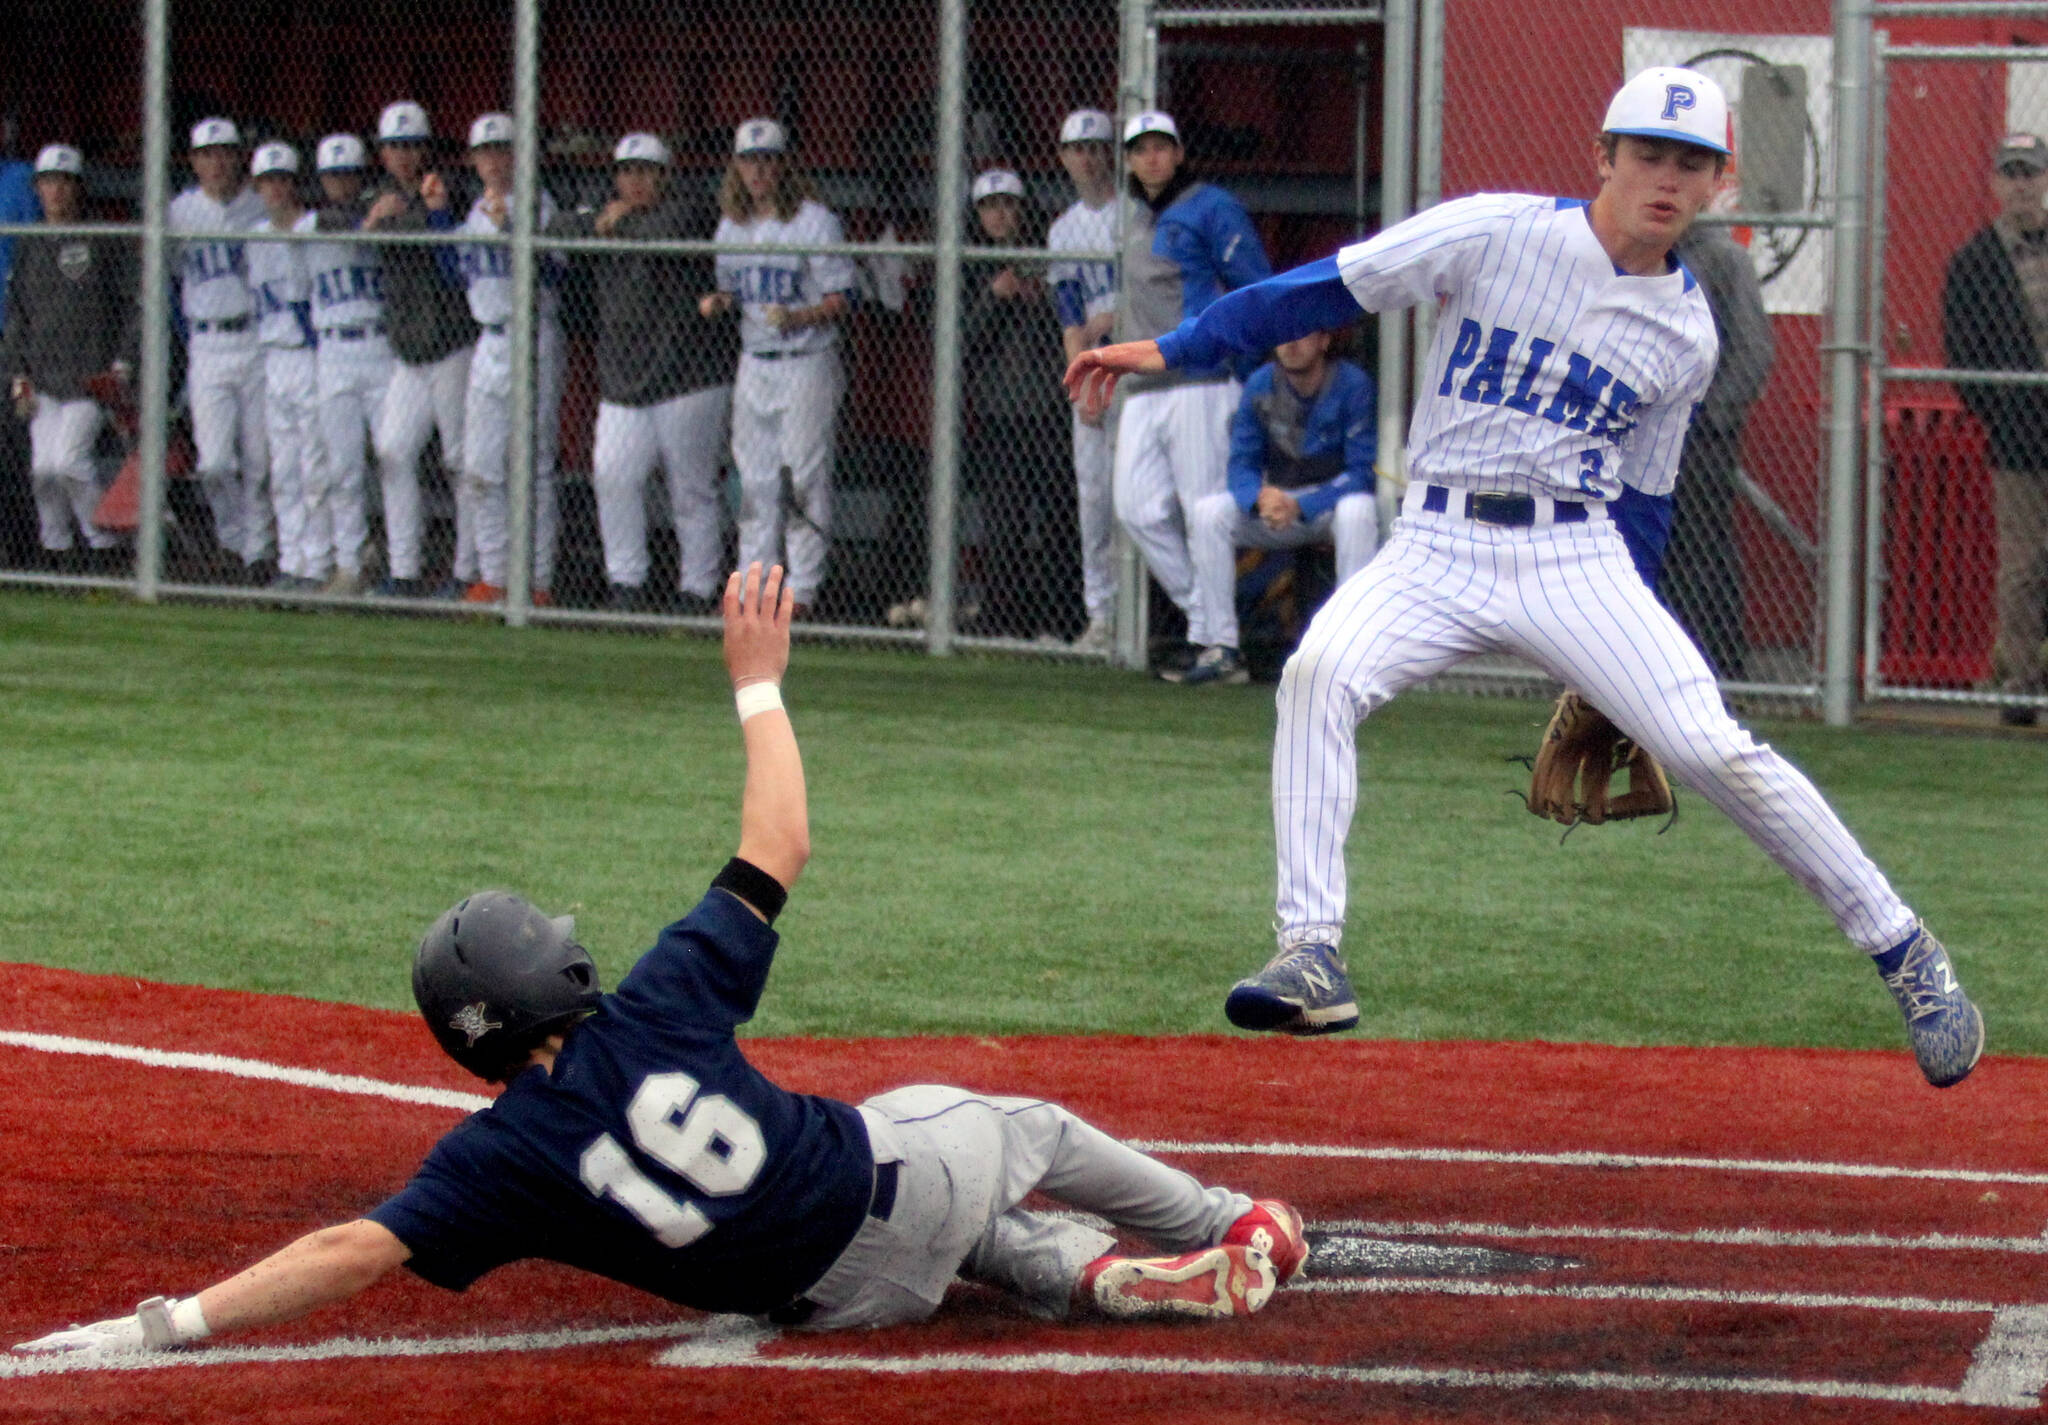 Soldotna’s Easton Hawkins slides into home underneath Palmer pitcher Reed Craner during SoHi’s six-run first inning of its Division II state quarterfinal game against the Moose Thursday, June 1, 2023, at Wasilla High School. (Jeremiah Bartz/Frontiersman)